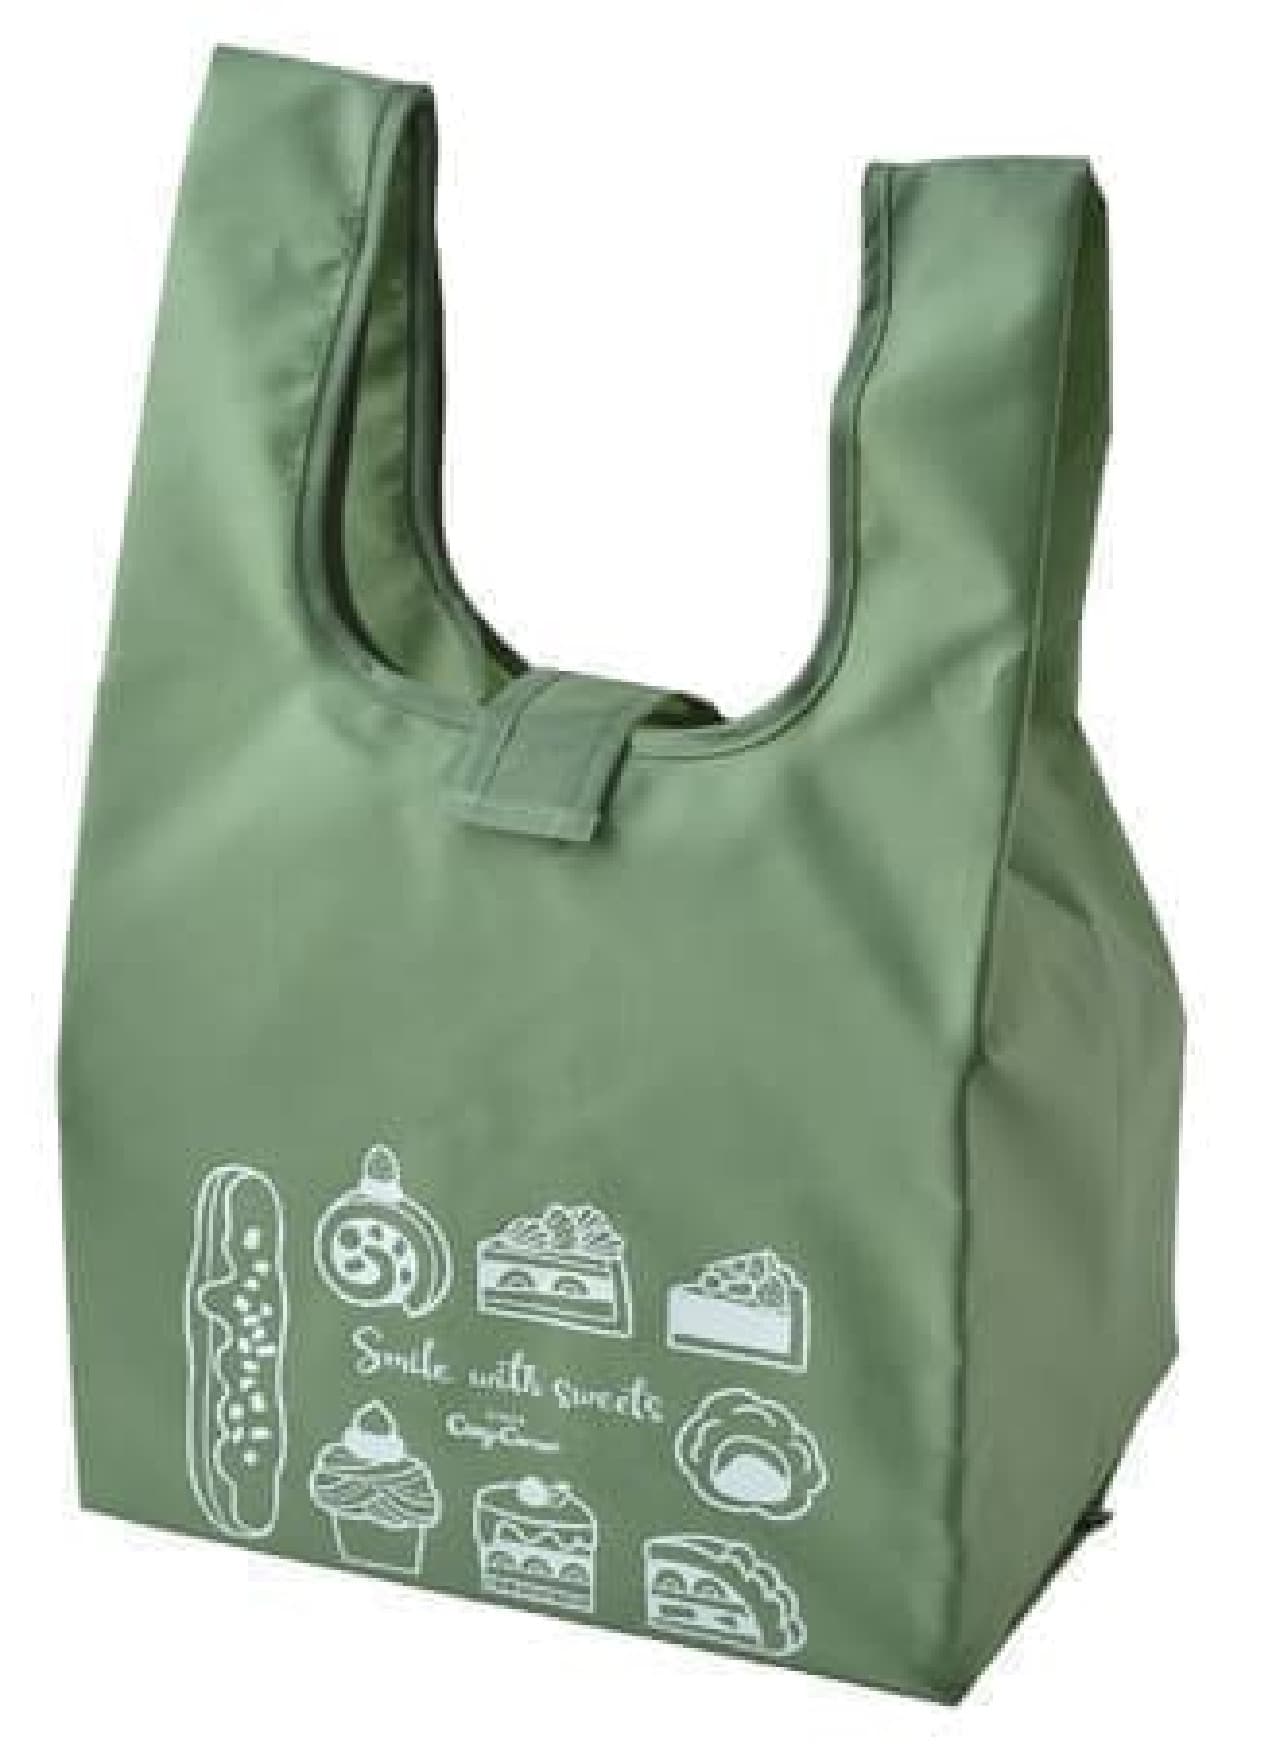 Original eco bag from Ginza Cozy Corner --For carrying cakes & with cute sweets pattern